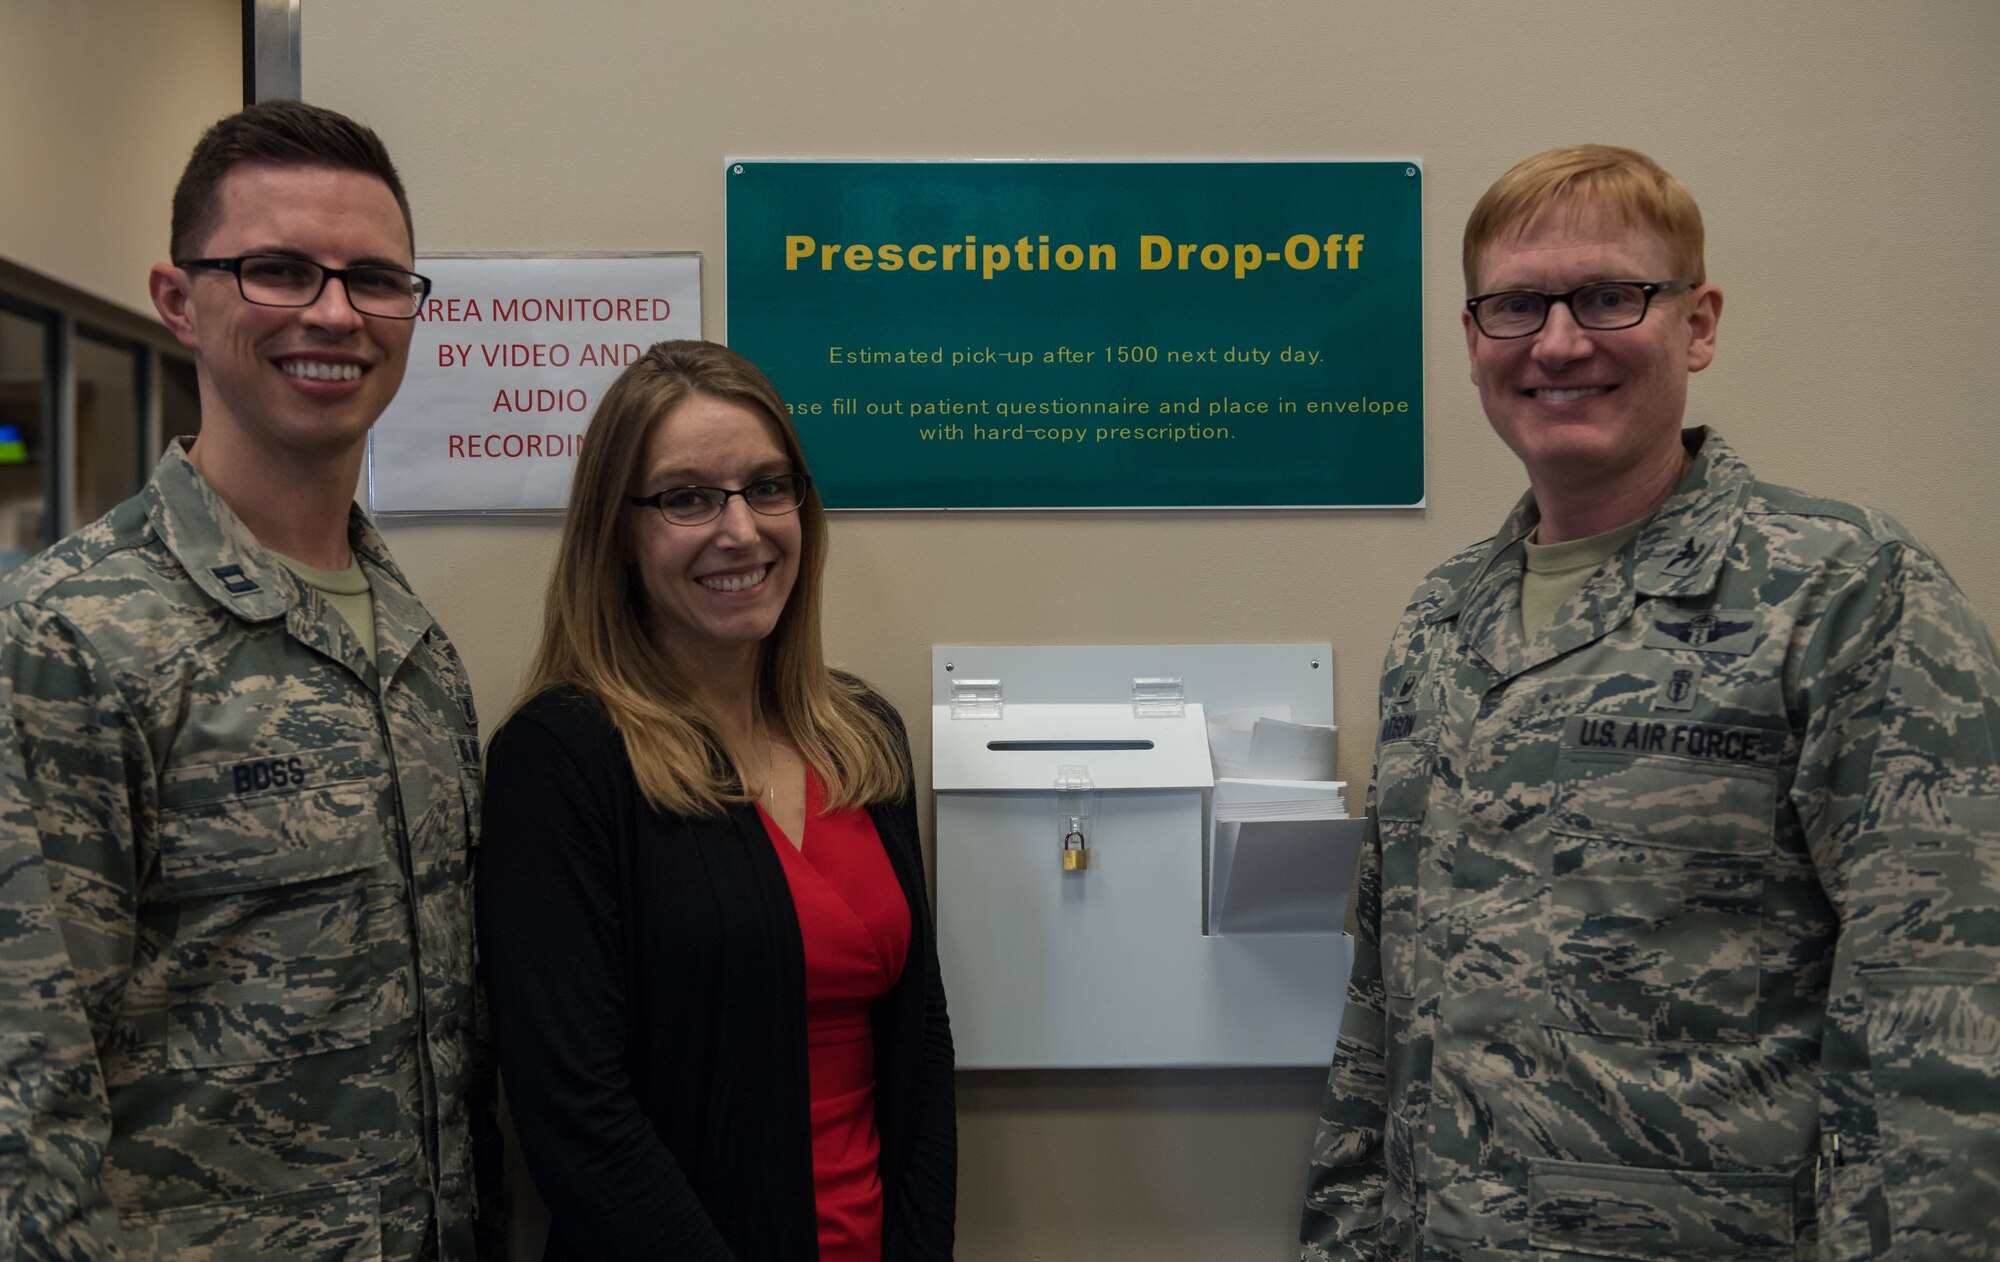 Capt. Angelo Boss, left, 2nd Medical Group Satellite Pharmacy’s element chief, Monica Miller, center, key spouse, and Col. Christopher Hudson, right, 2nd MDG commander, pose for a photo in front of a prescription drop box at Barksdale Air Force Base, La., Feb. 4, 2019. There are three drop boxes, one at the entrance, the lobby and the second drive-thru lane at the satellite pharmacy.  (U.S. Air Force photo by Senior Airman Cassandra Johnson)